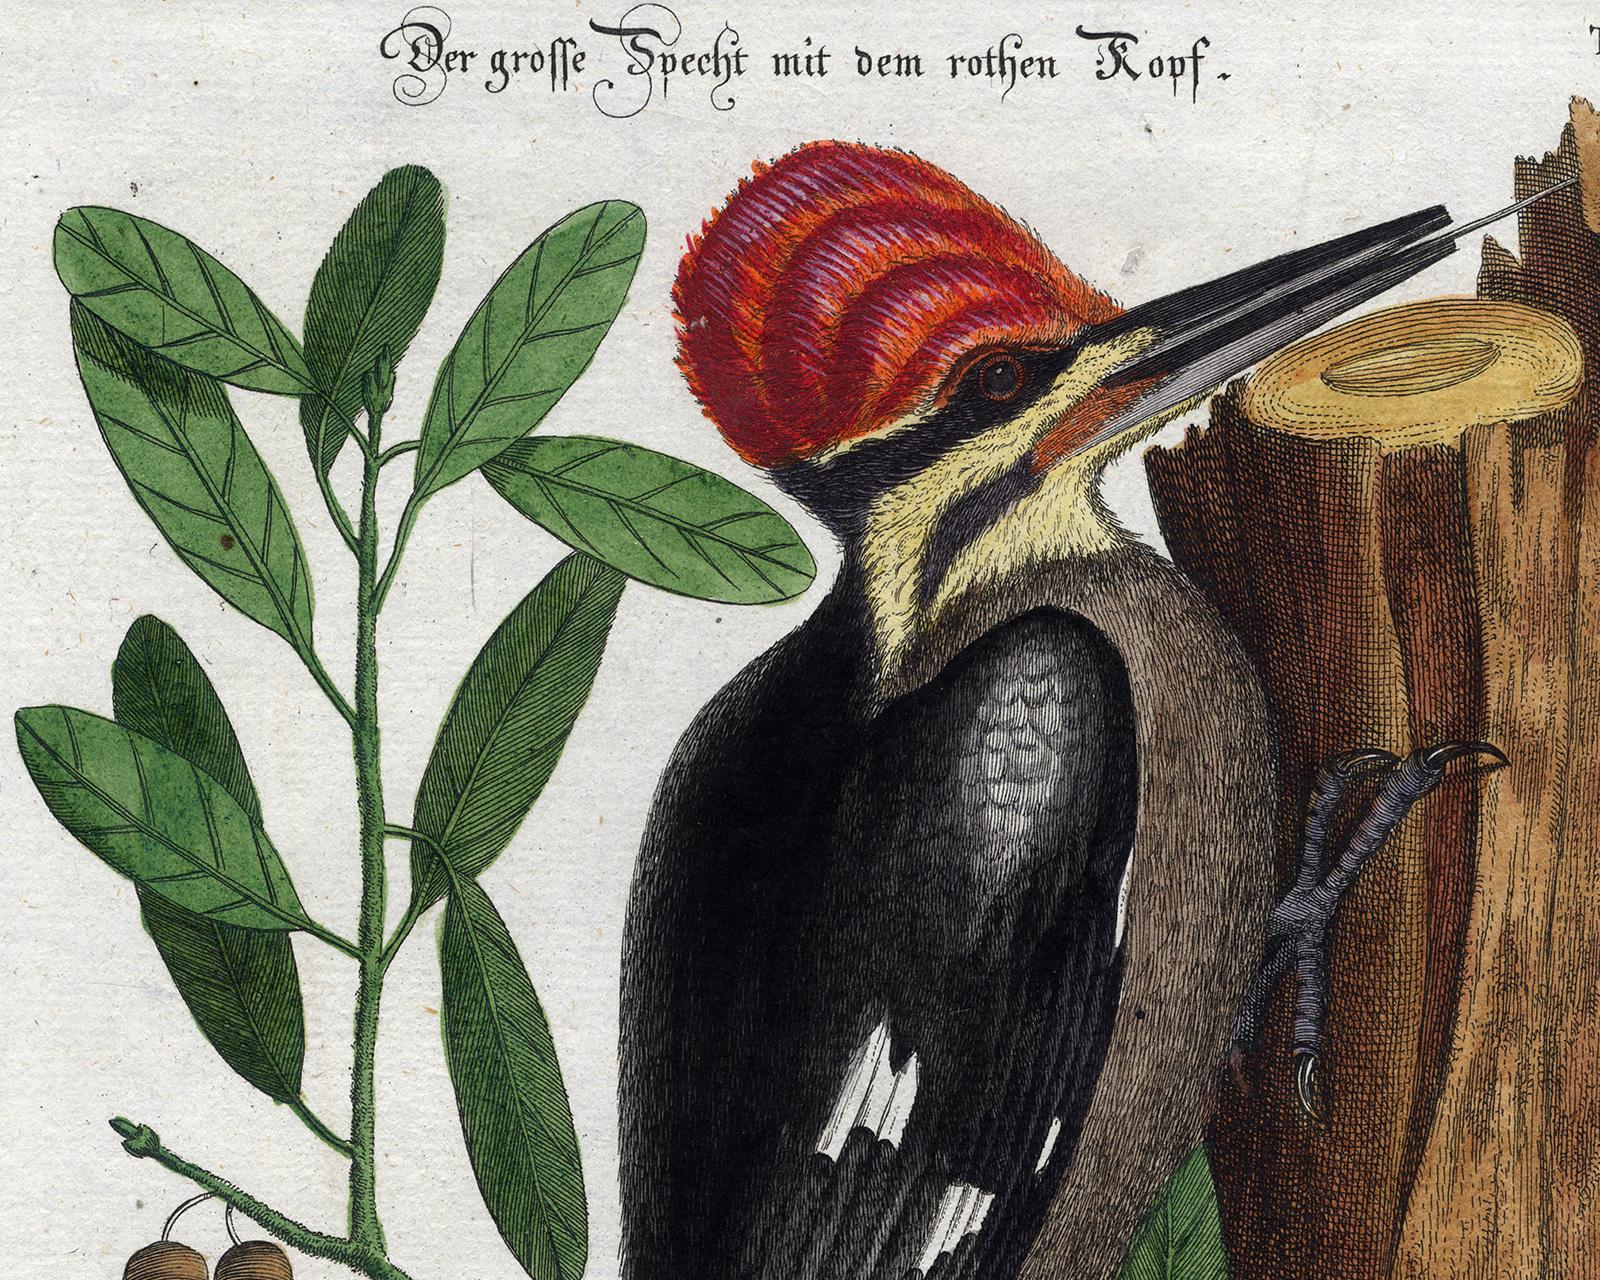 Red-Headed Woodpecker by Seligmann - Handcoloured etching - 18th century - Old Masters Print by Johann Michael Seligmann